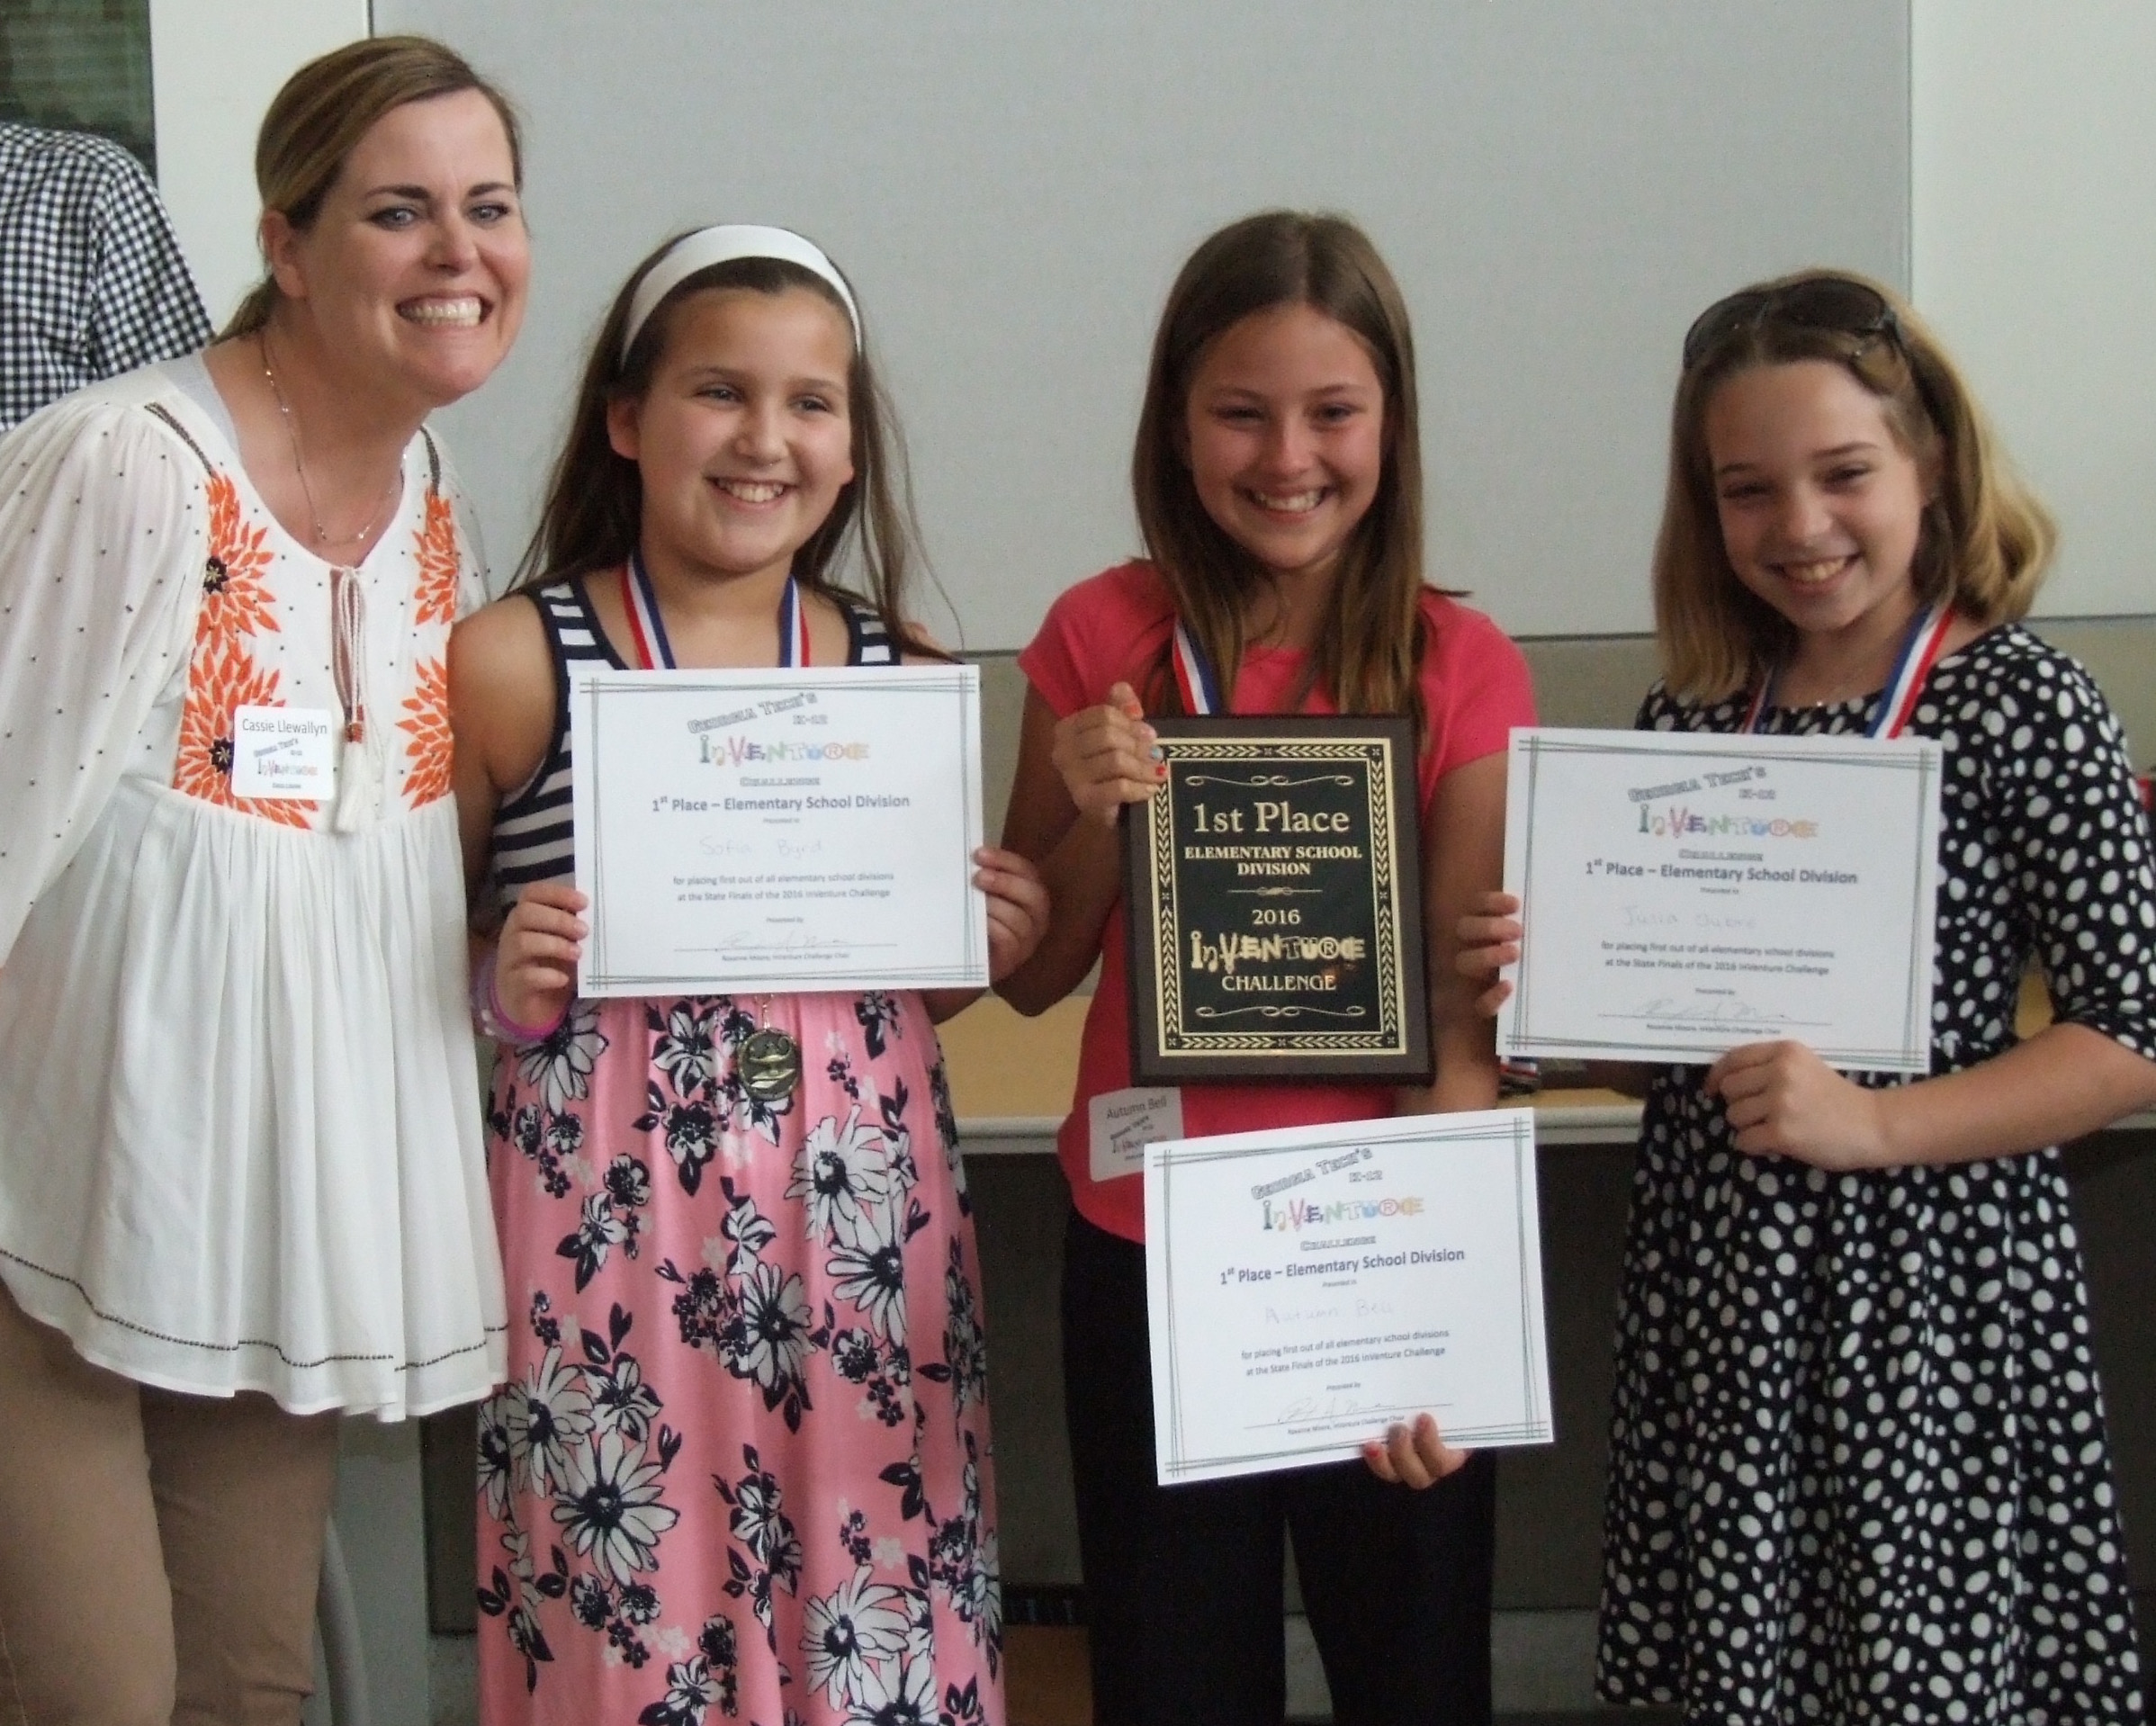 1st Place Elementary Award: Team: Bristles 4 Braces School: Pickett’s Mill Elementary School Students: Julia Oubre, Sofia Byrd, and Autumn Bell